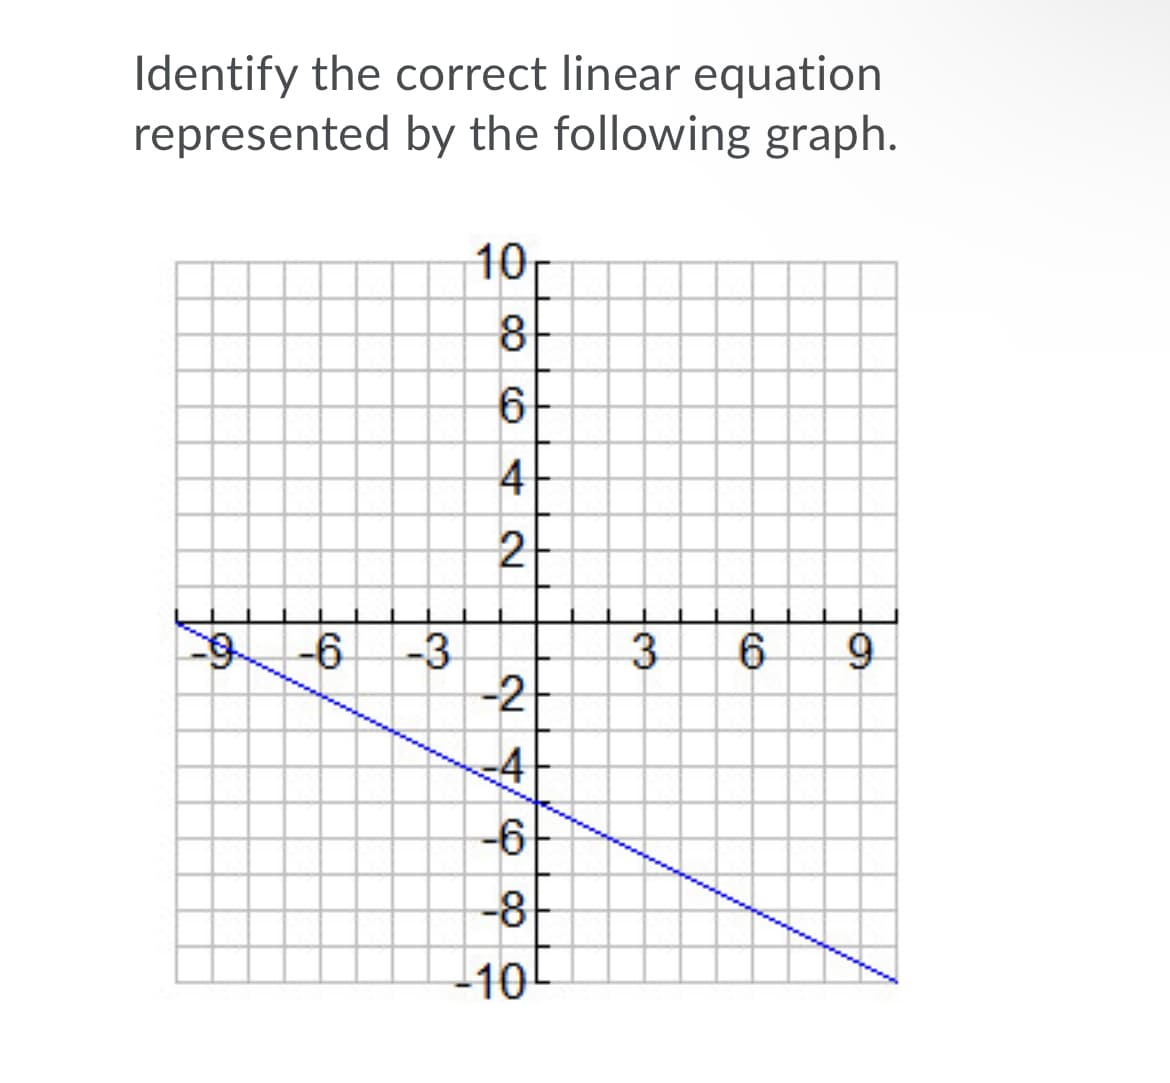 Identify the correct linear equation
represented by the following graph.
10-
8-
6
4
2
9-6
-3
-2
4
-6
-8-
-10
3.
